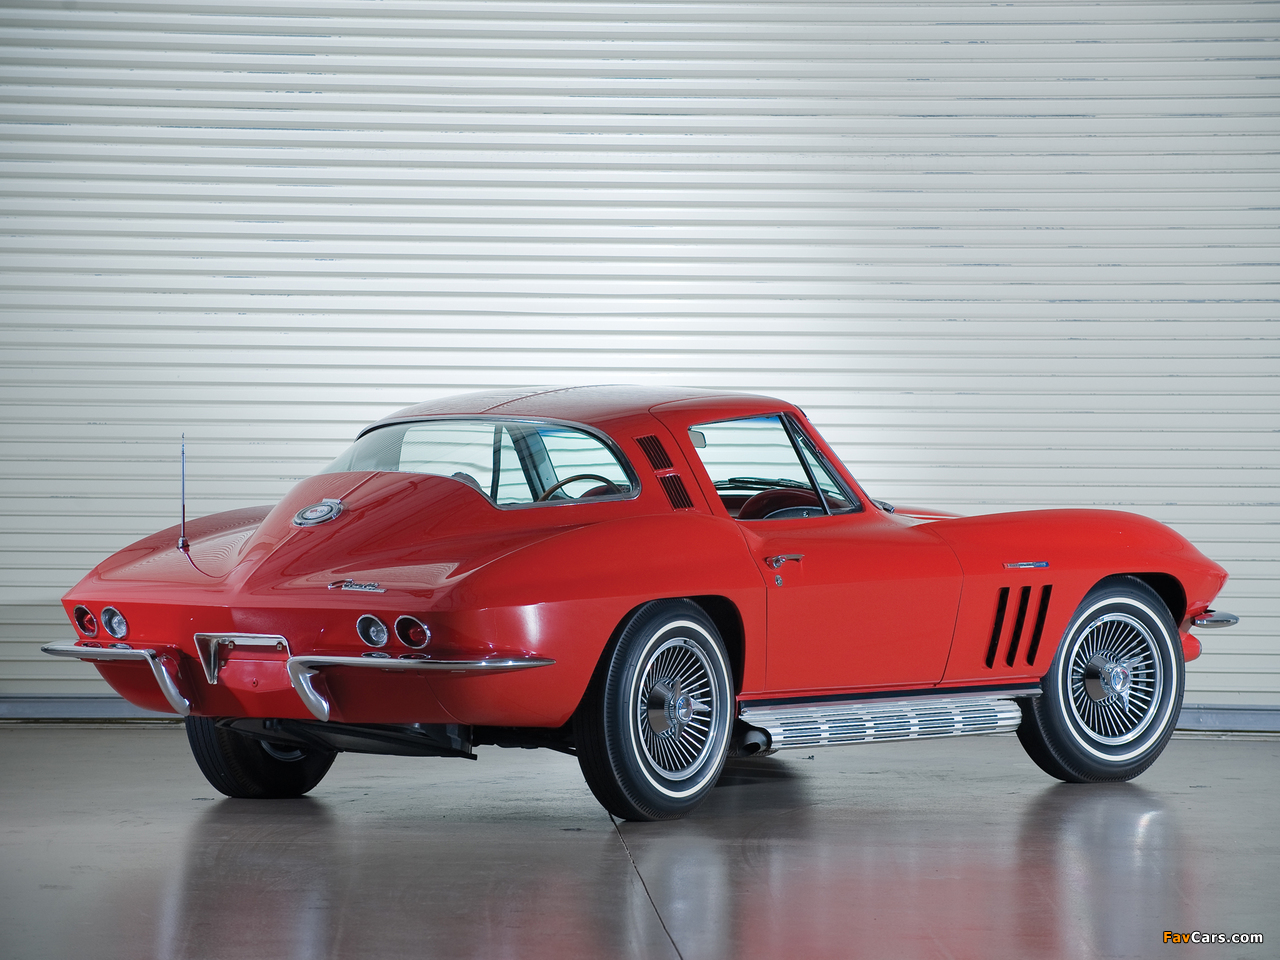 Corvette Sting Ray L84 327/375 HP Fuel Injection (C2) 1965 images (1280 x 960)